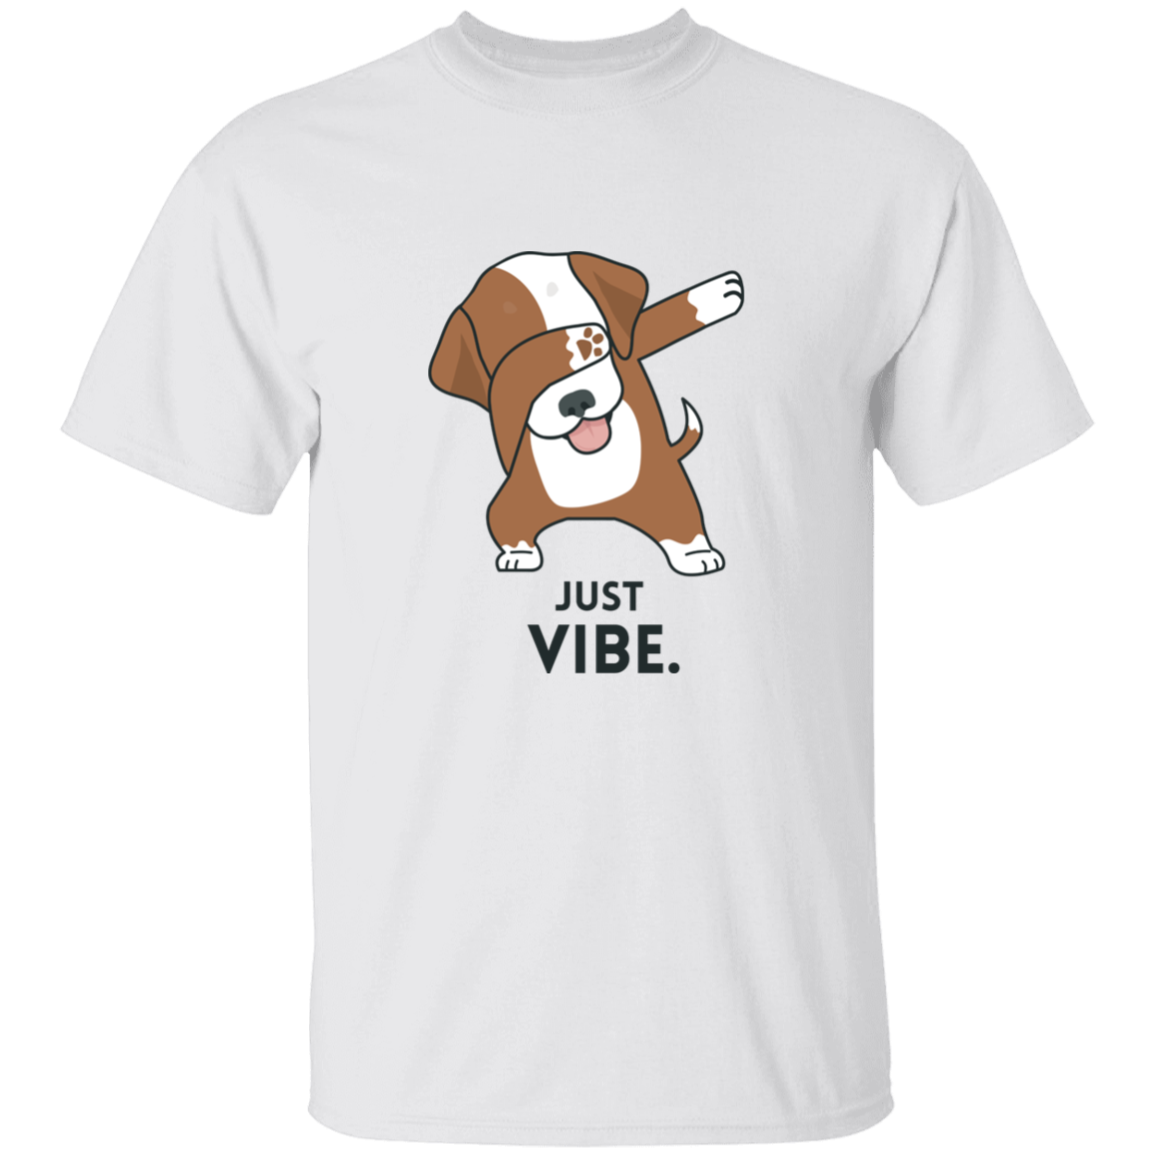 JUST VIBE YOUTH COTTON T-SHIRT